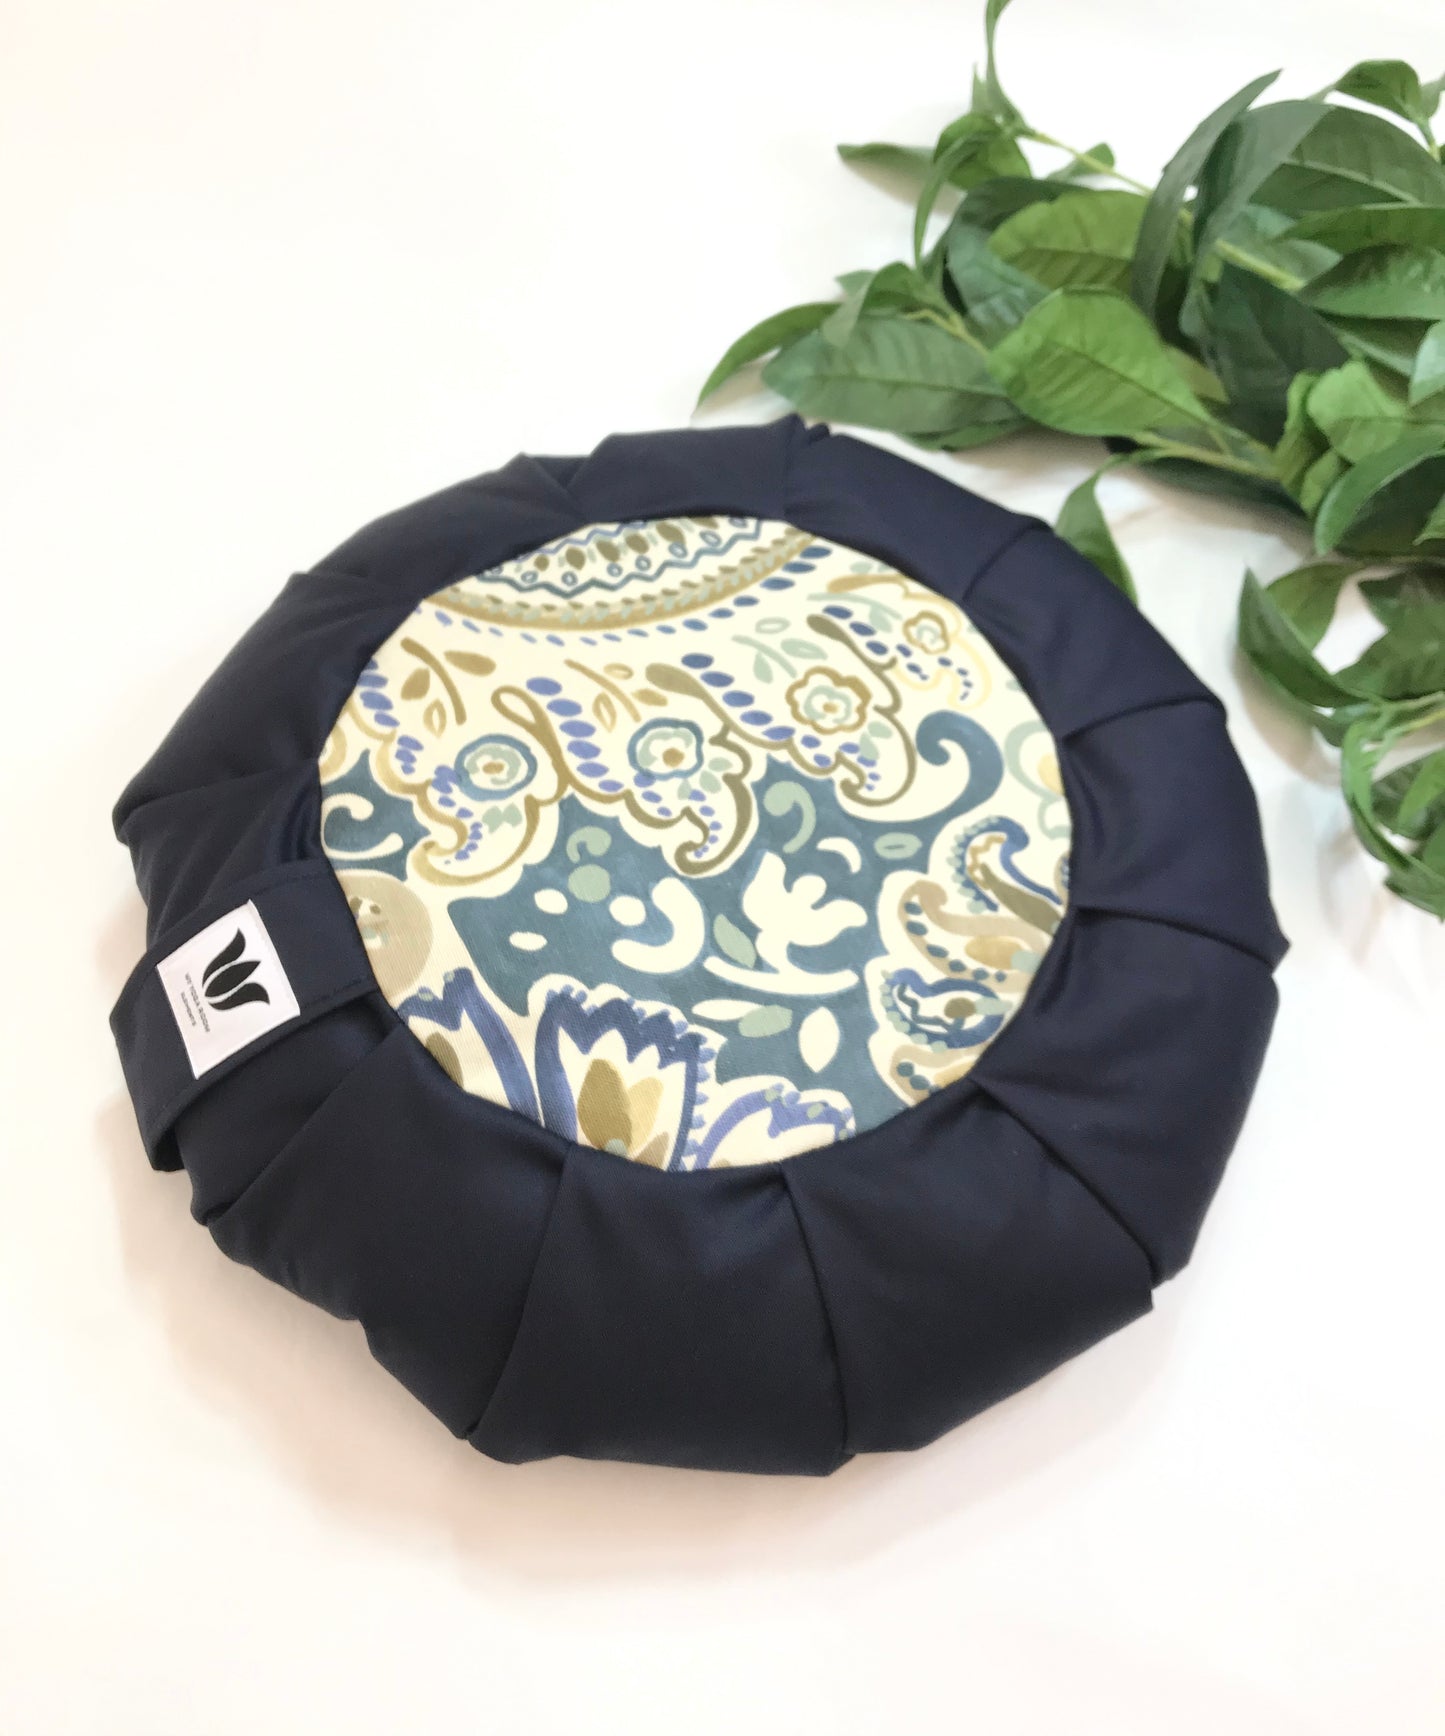 Handcrafted premium cotton canvas fabric meditation seat cushion in shades navy blue and blue, green, yellow modern graphic printfabric. Align the spine and body in comfort to calm the monkey mind in your meditation practice. Handcrafted in Calgary, Alberta Canada